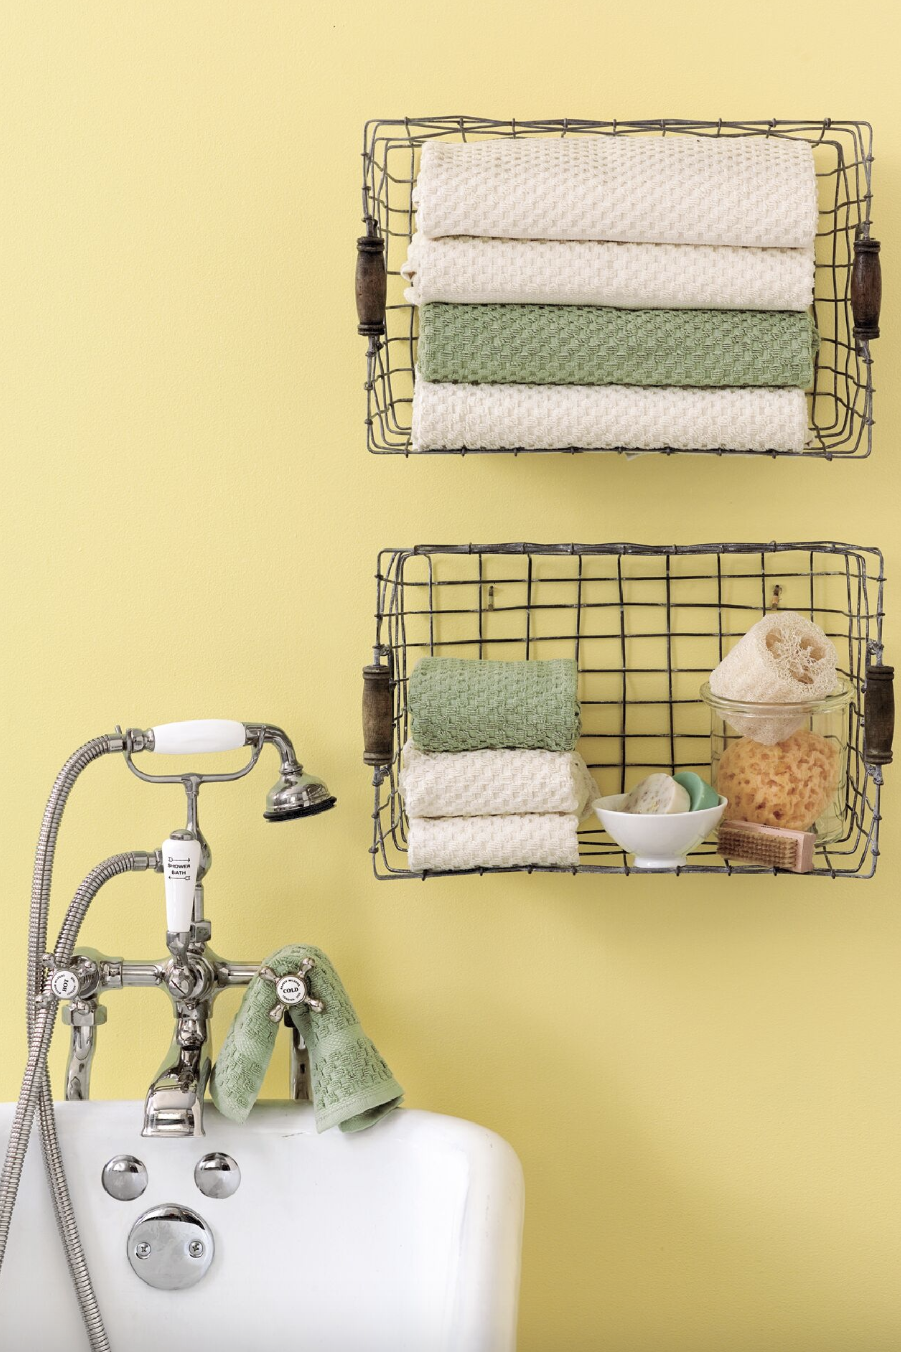 How to Use Baskets in Your Bathroom - Styling & Storage Tips